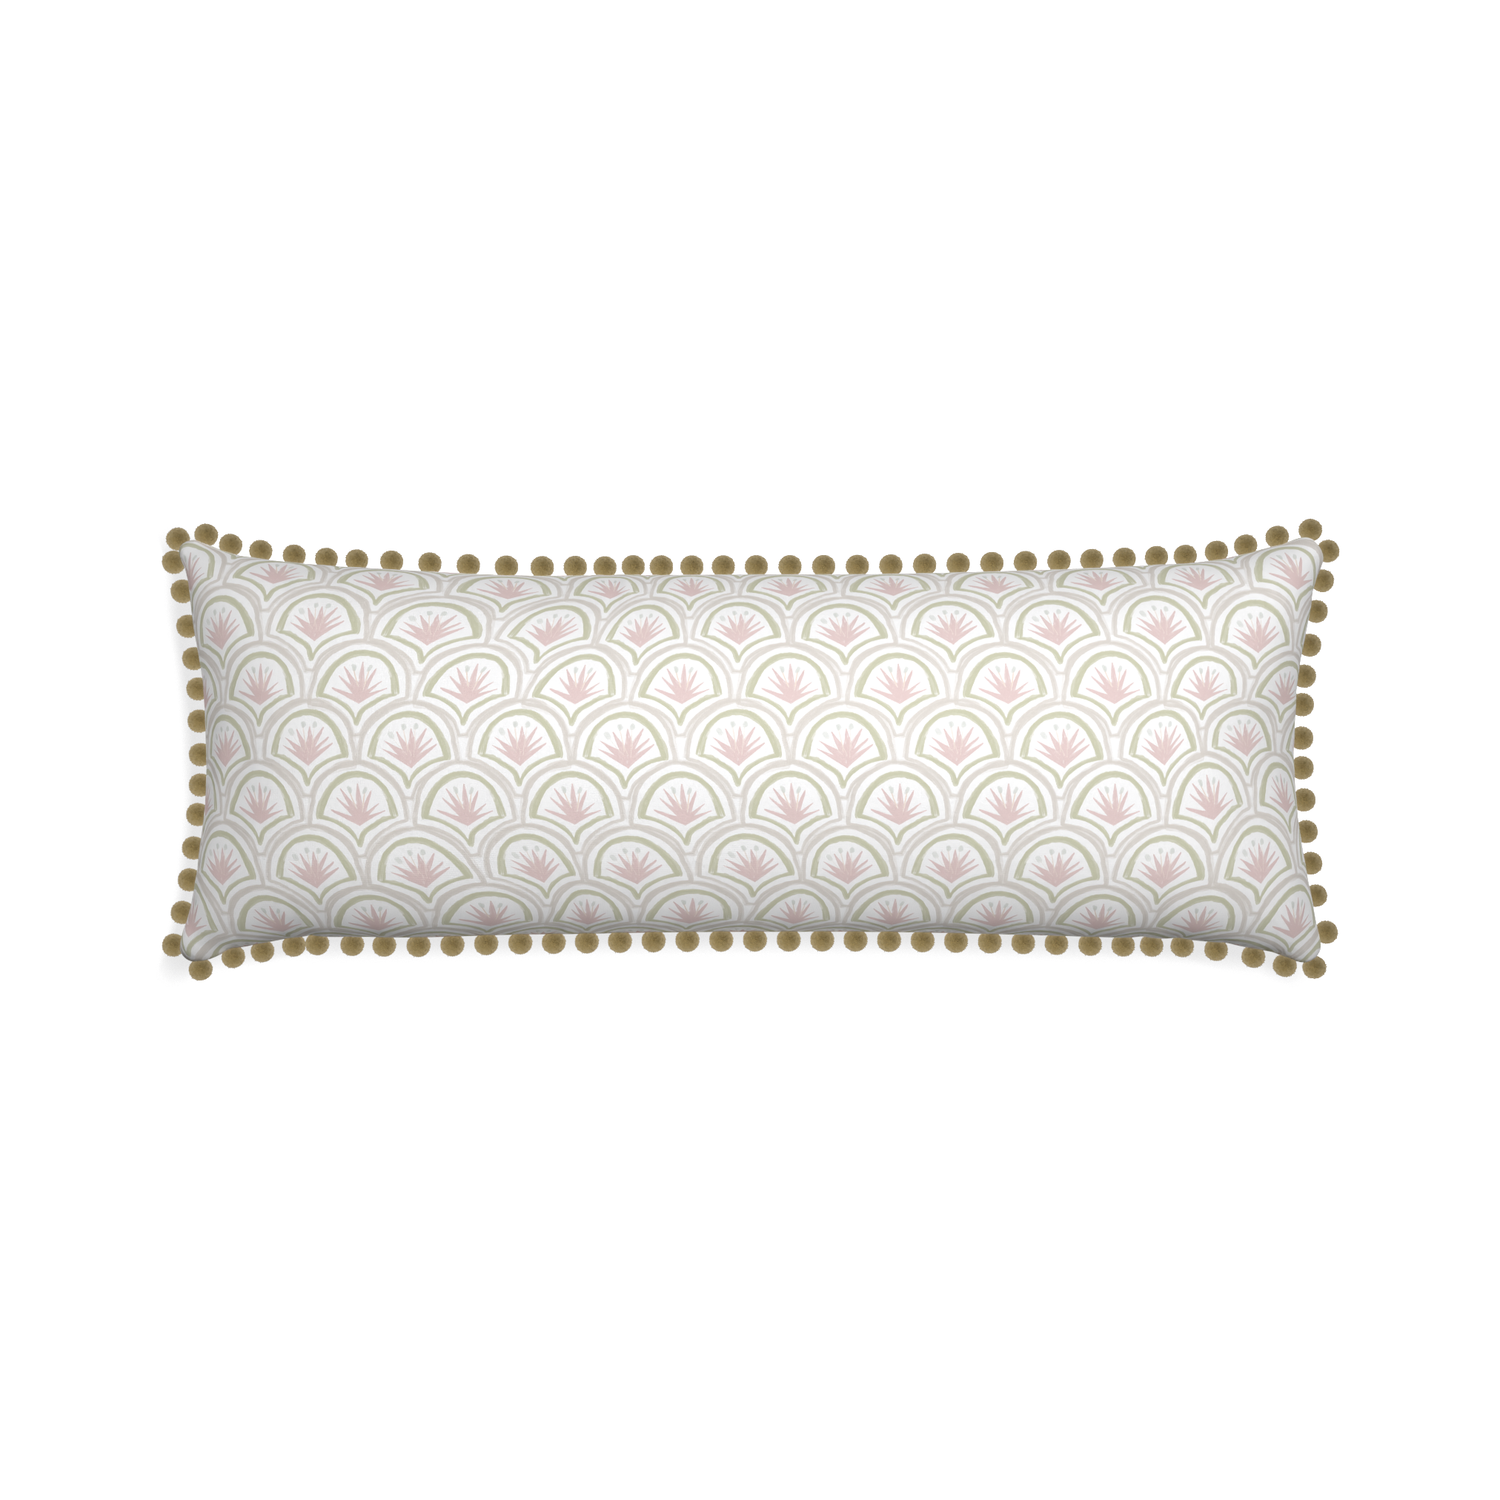 Xl-lumbar thatcher rose custom pillow with olive pom pom on white background